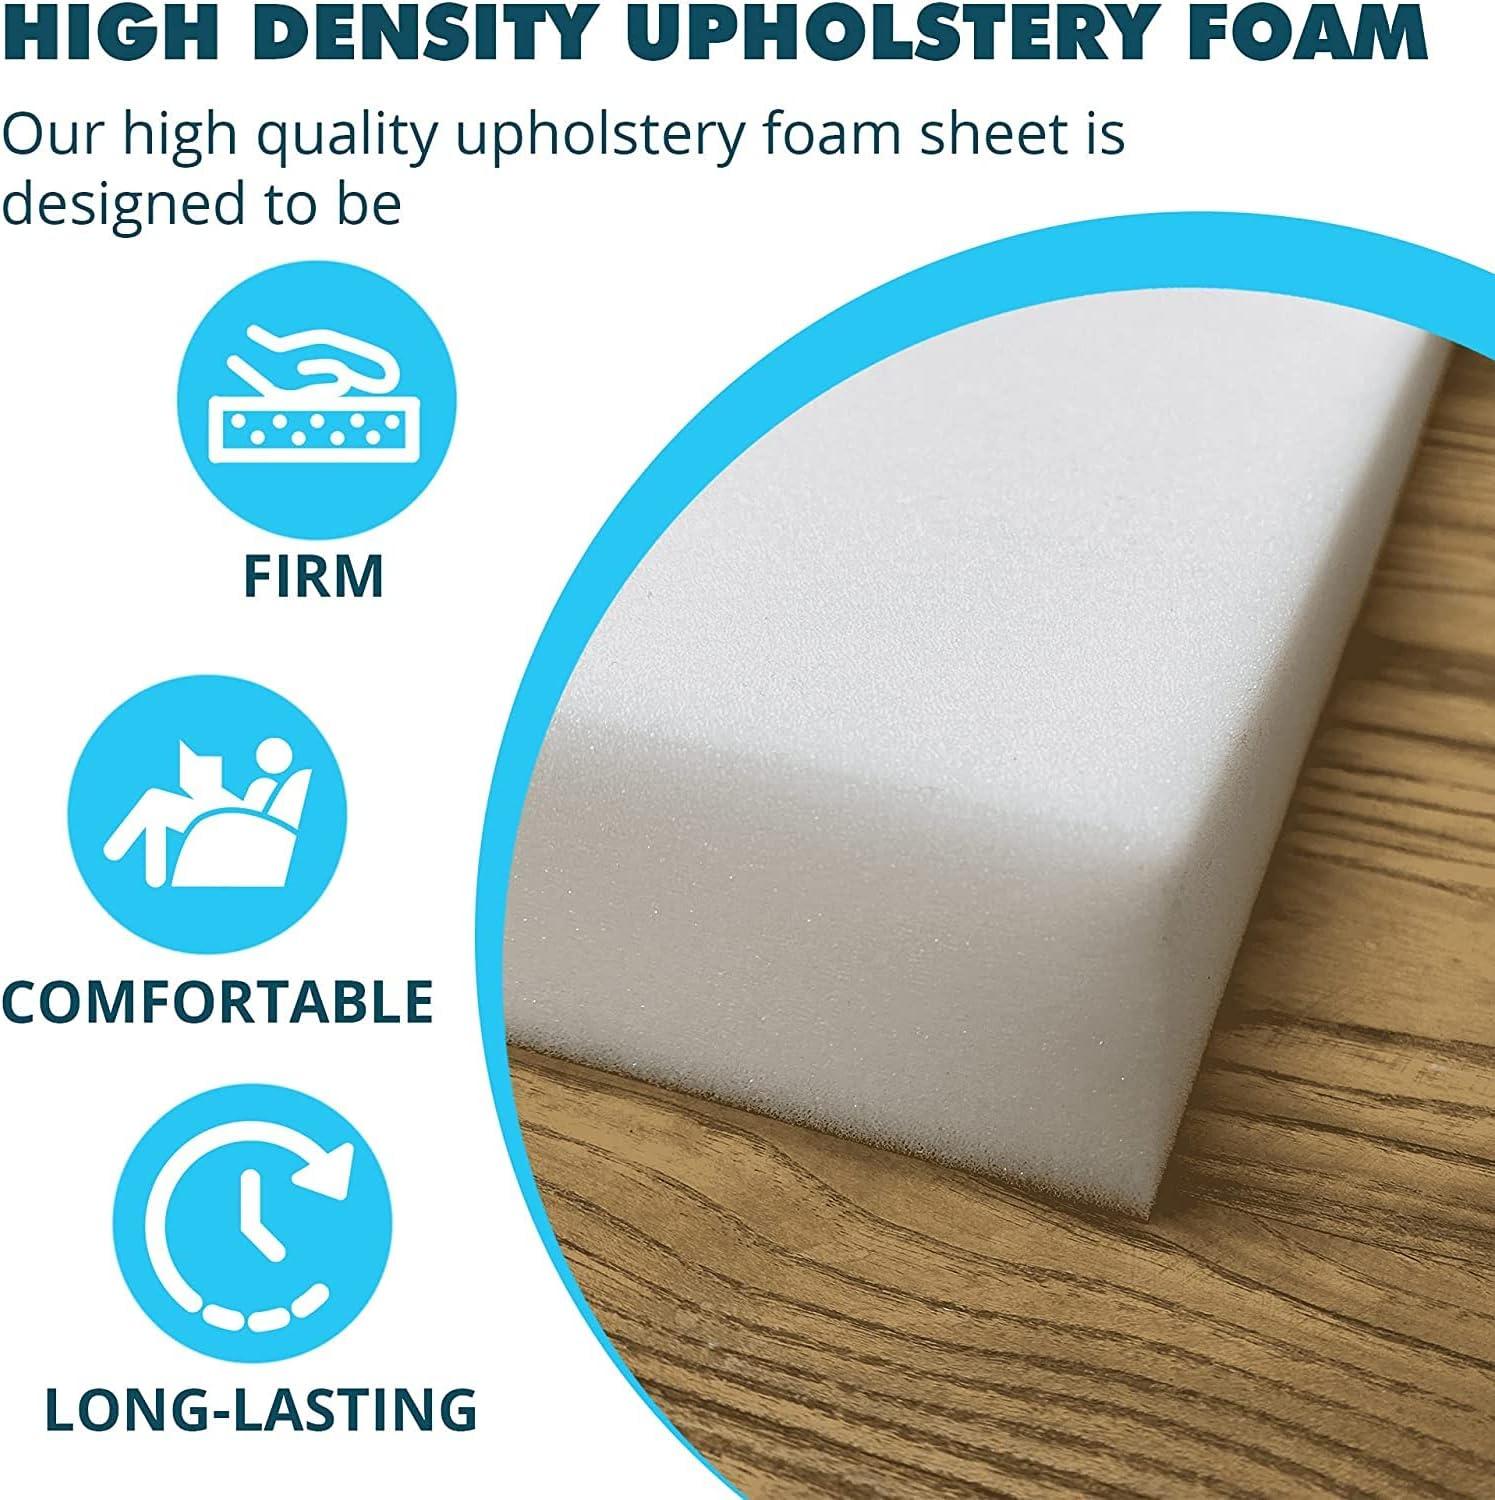 Foamma 5 x 22 x 24 High Density Upholstery Foam Padding, Thick-Custom  Pillow, Chair, and Couch Cushion Replacement Foam, Craft Foam Upholstery  Supplies, Foam Pad for Cushions and Seat Repair High Density